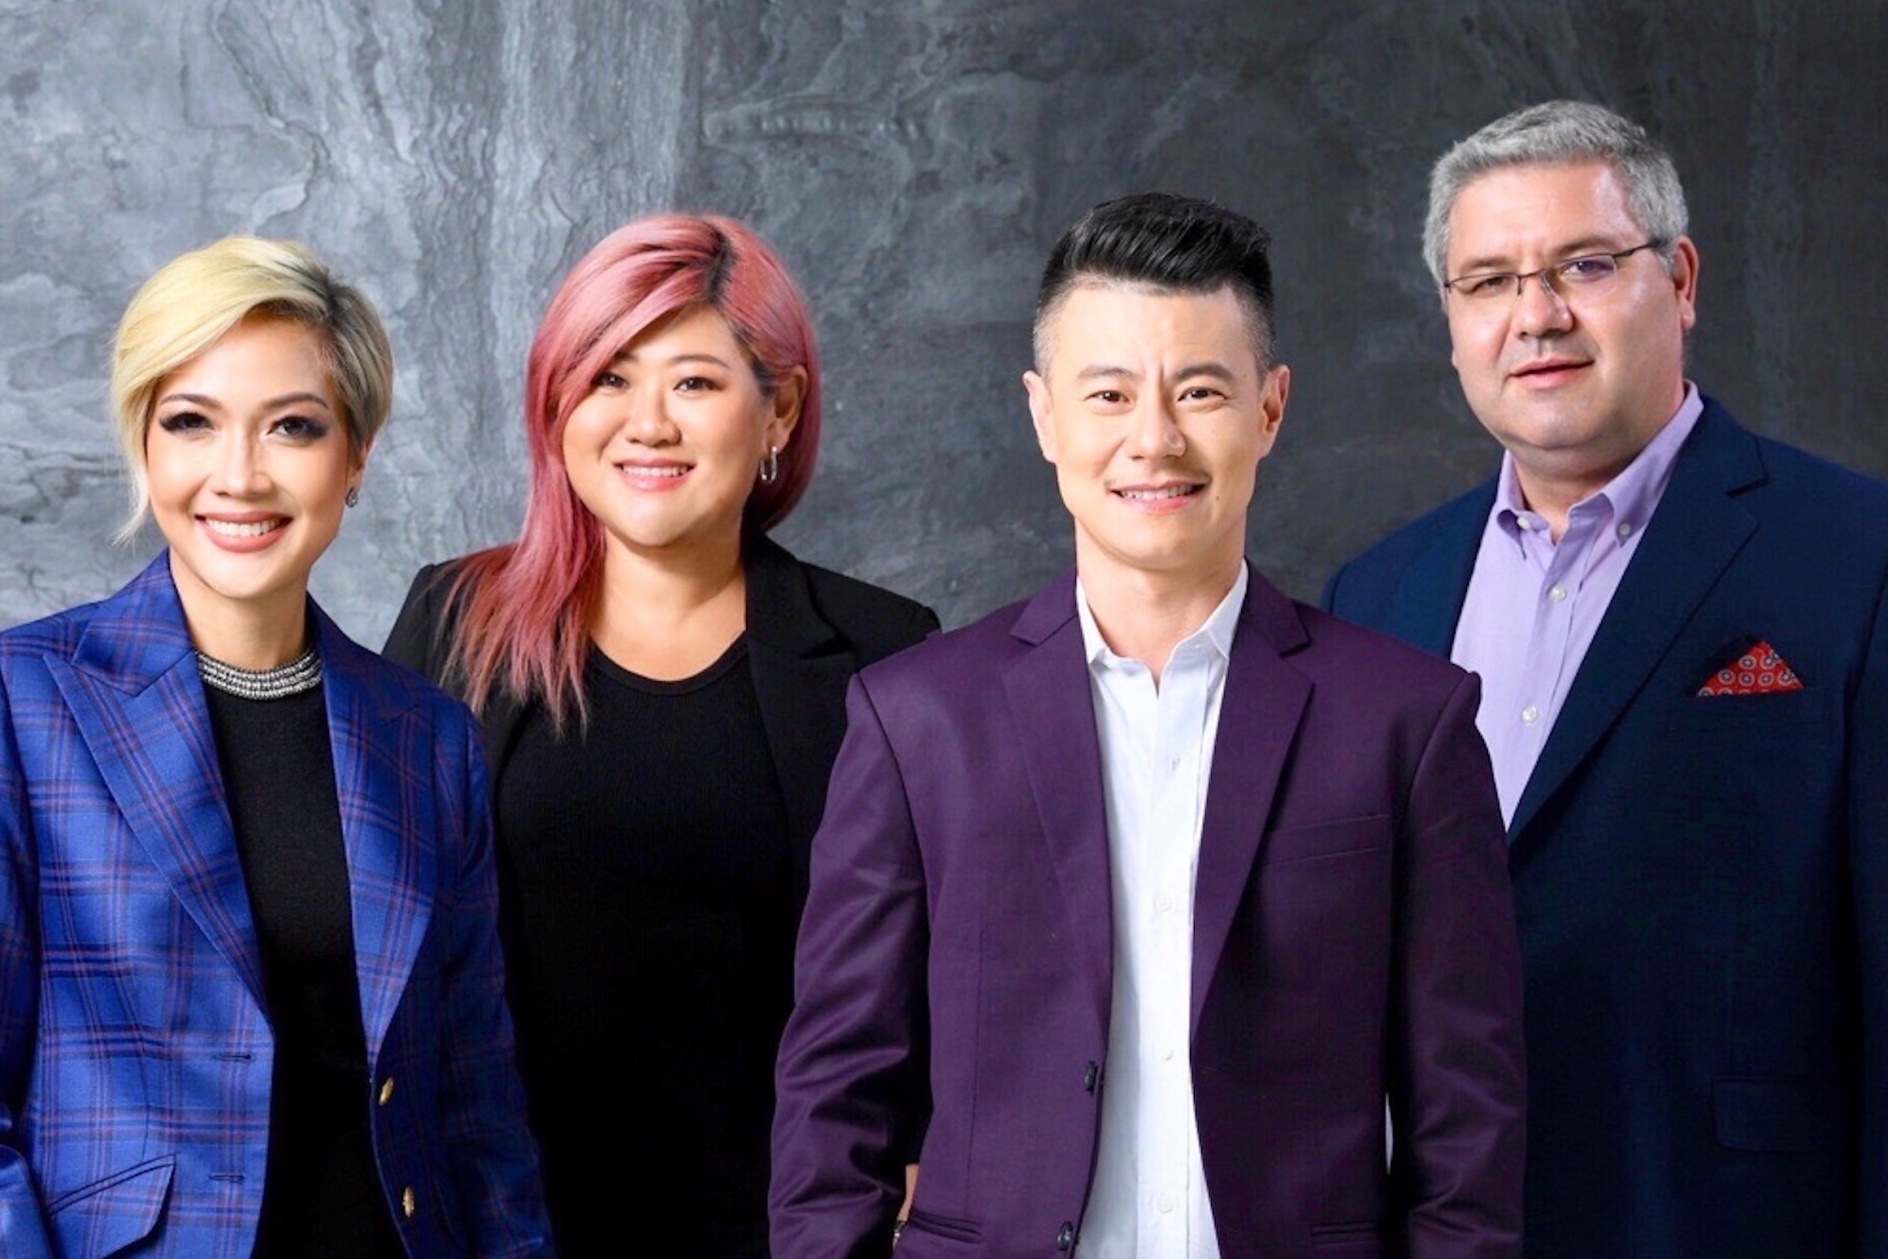 From left: Nalina Suranakarin, Chief Brand Officer; Praisie Huang, Chief Growth Officer; Hachi Yin, CEO and Founder; Ivo Tzvetkov, COO Click to enlarge.